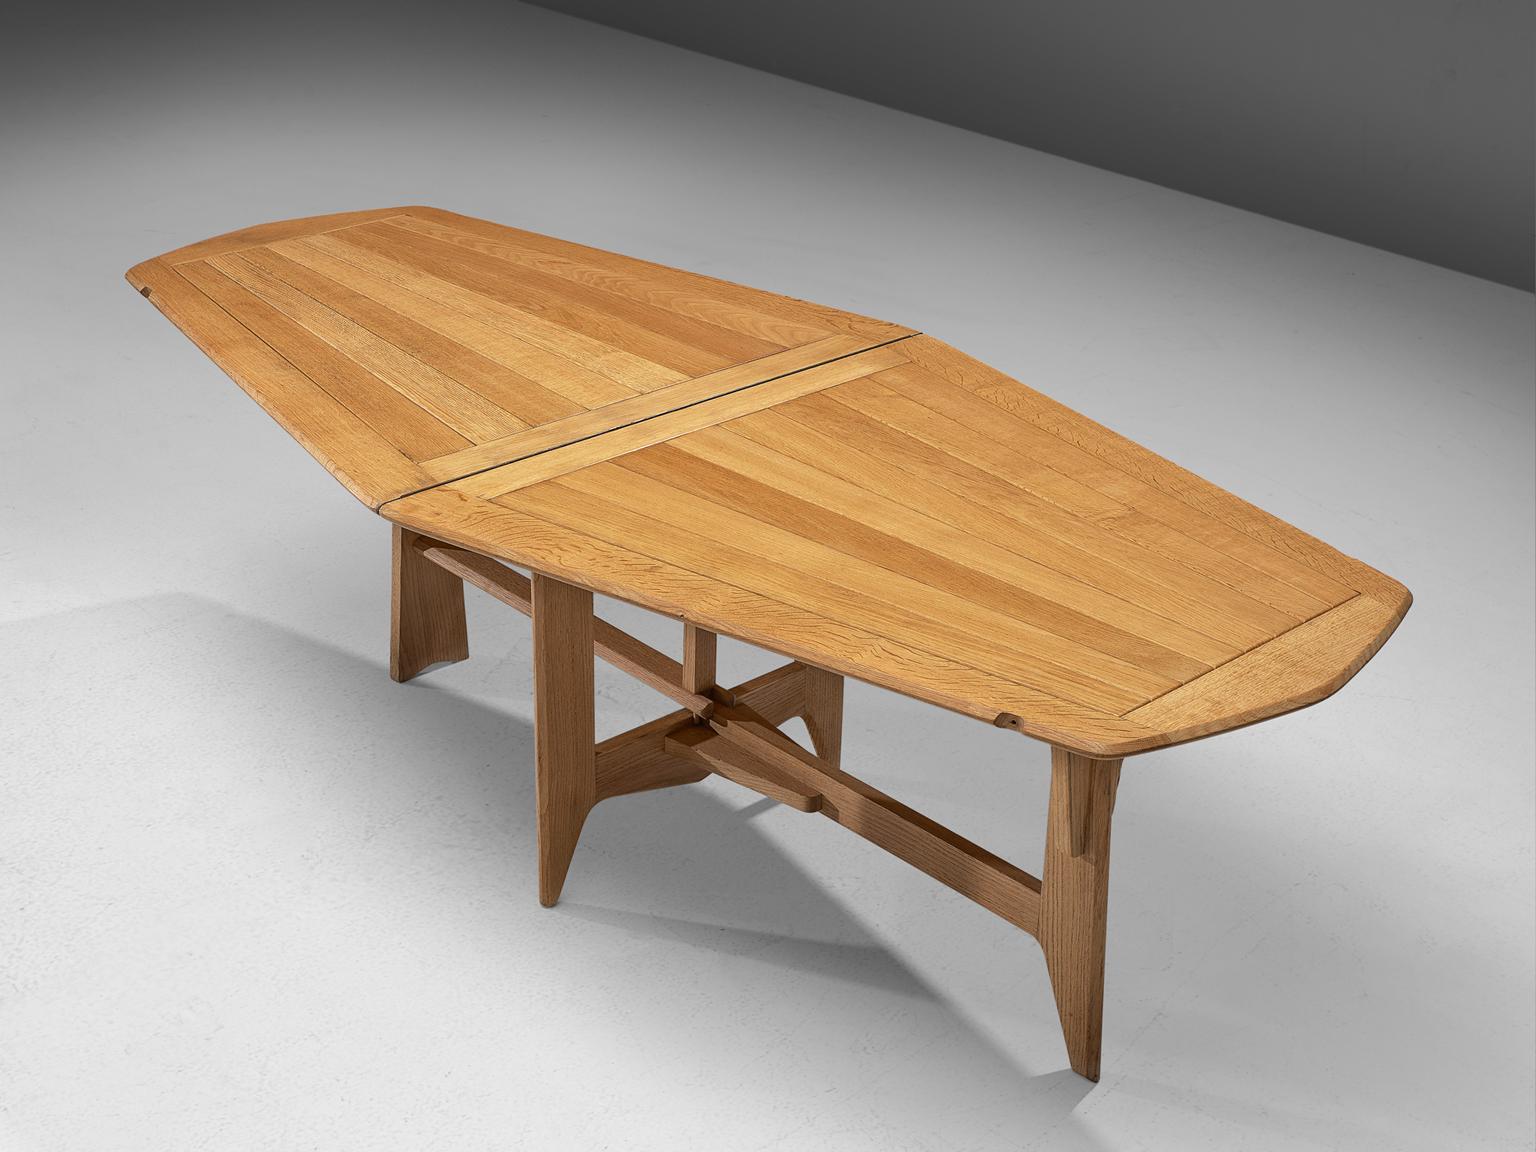 Guillerme et Chambron, table, solid oak, France, 1950s.

Inventive flip-flop table in solid oak by the French duo Guillerme et Chambron. As many of the furniture designed by this duo this piece also shows a strong character. The legs are very